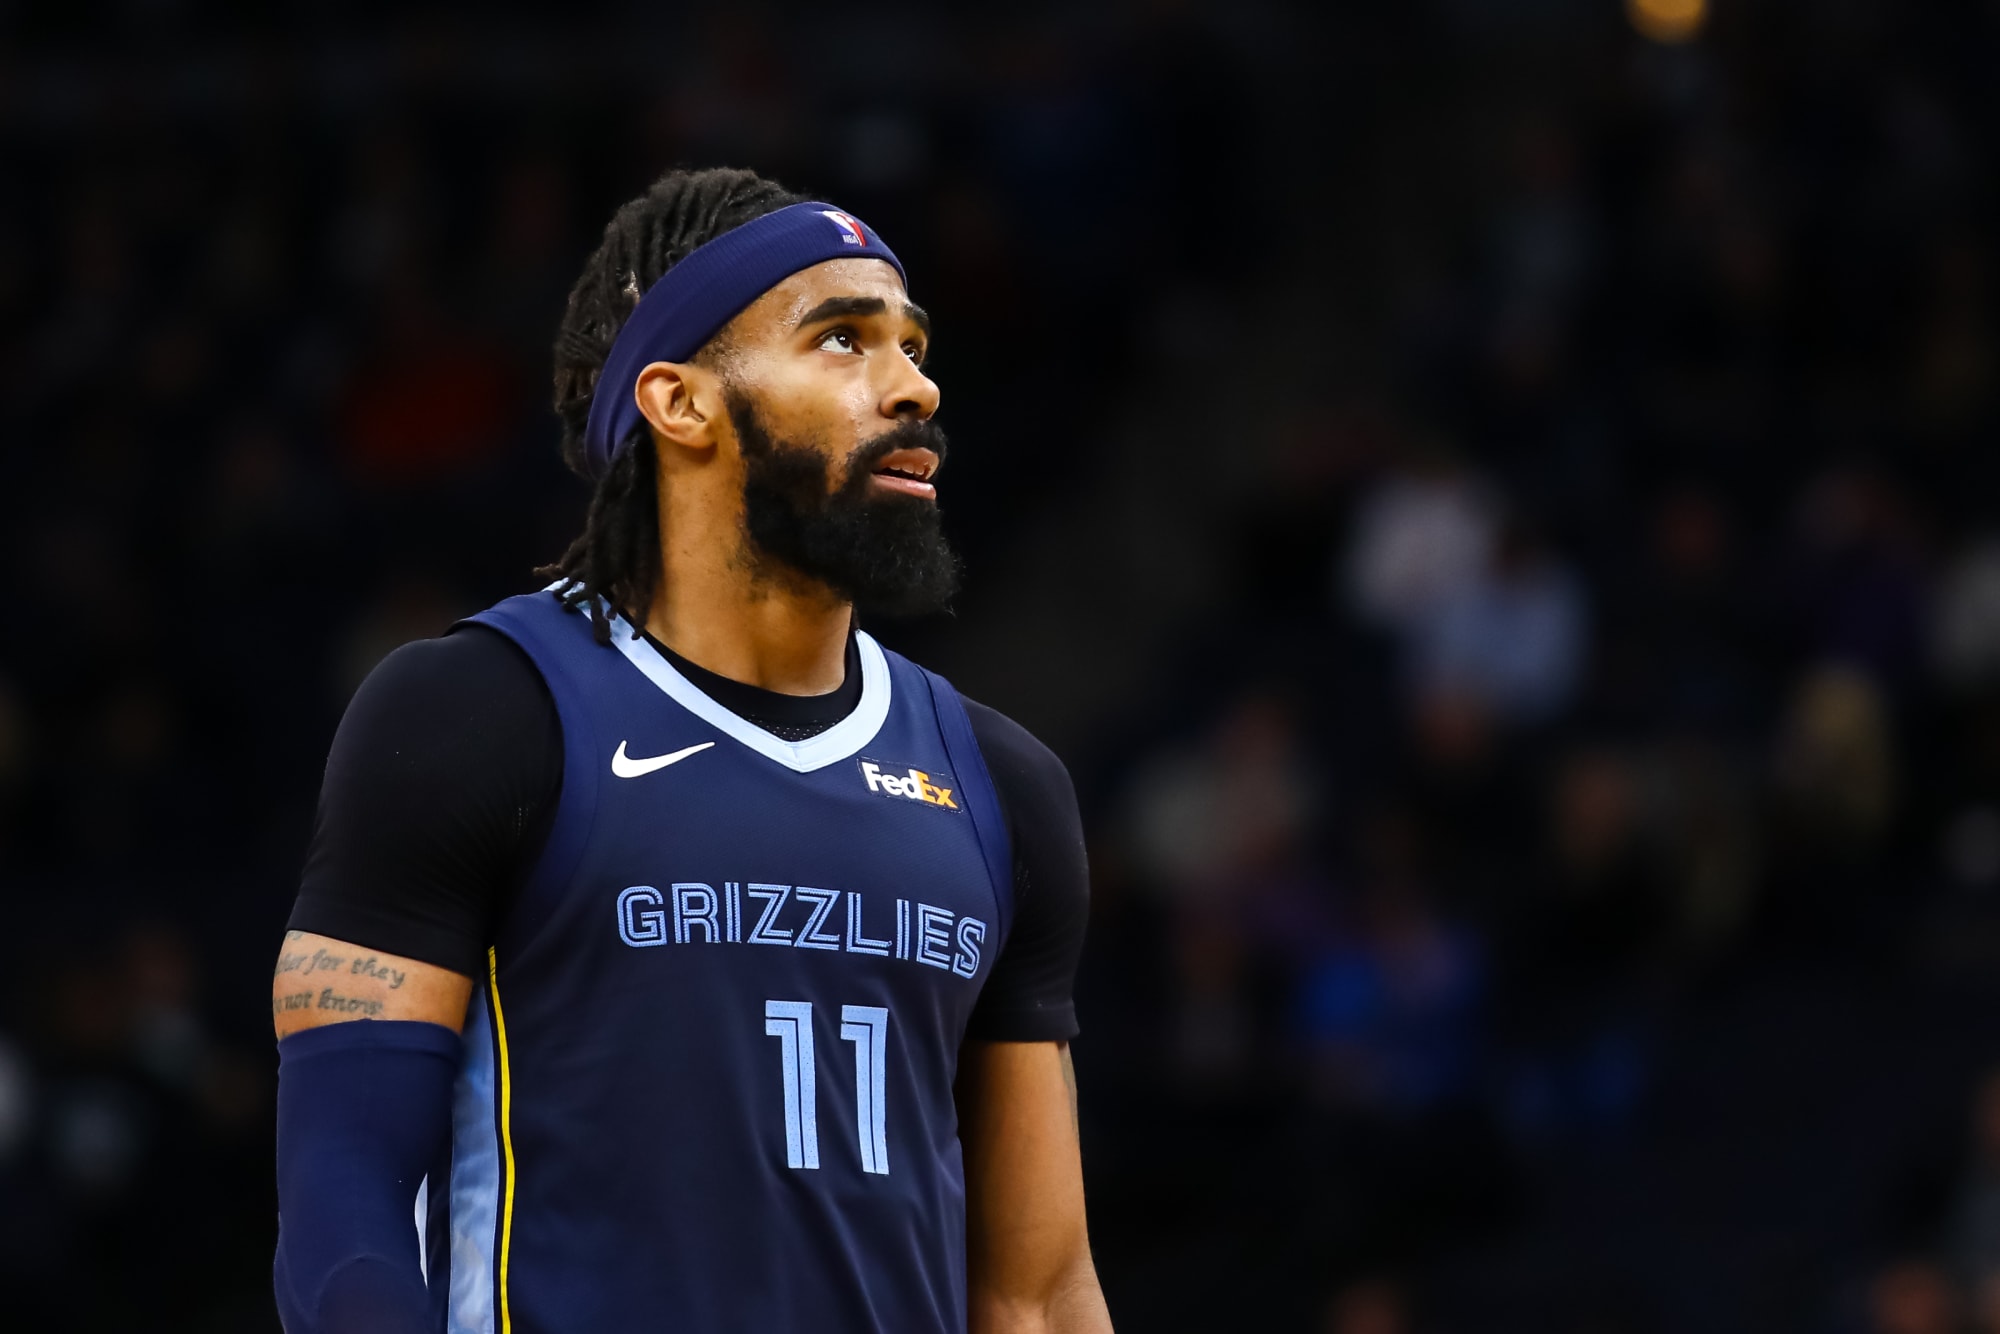 Memphis guard Mike Conley's career night sends Suns to fourth